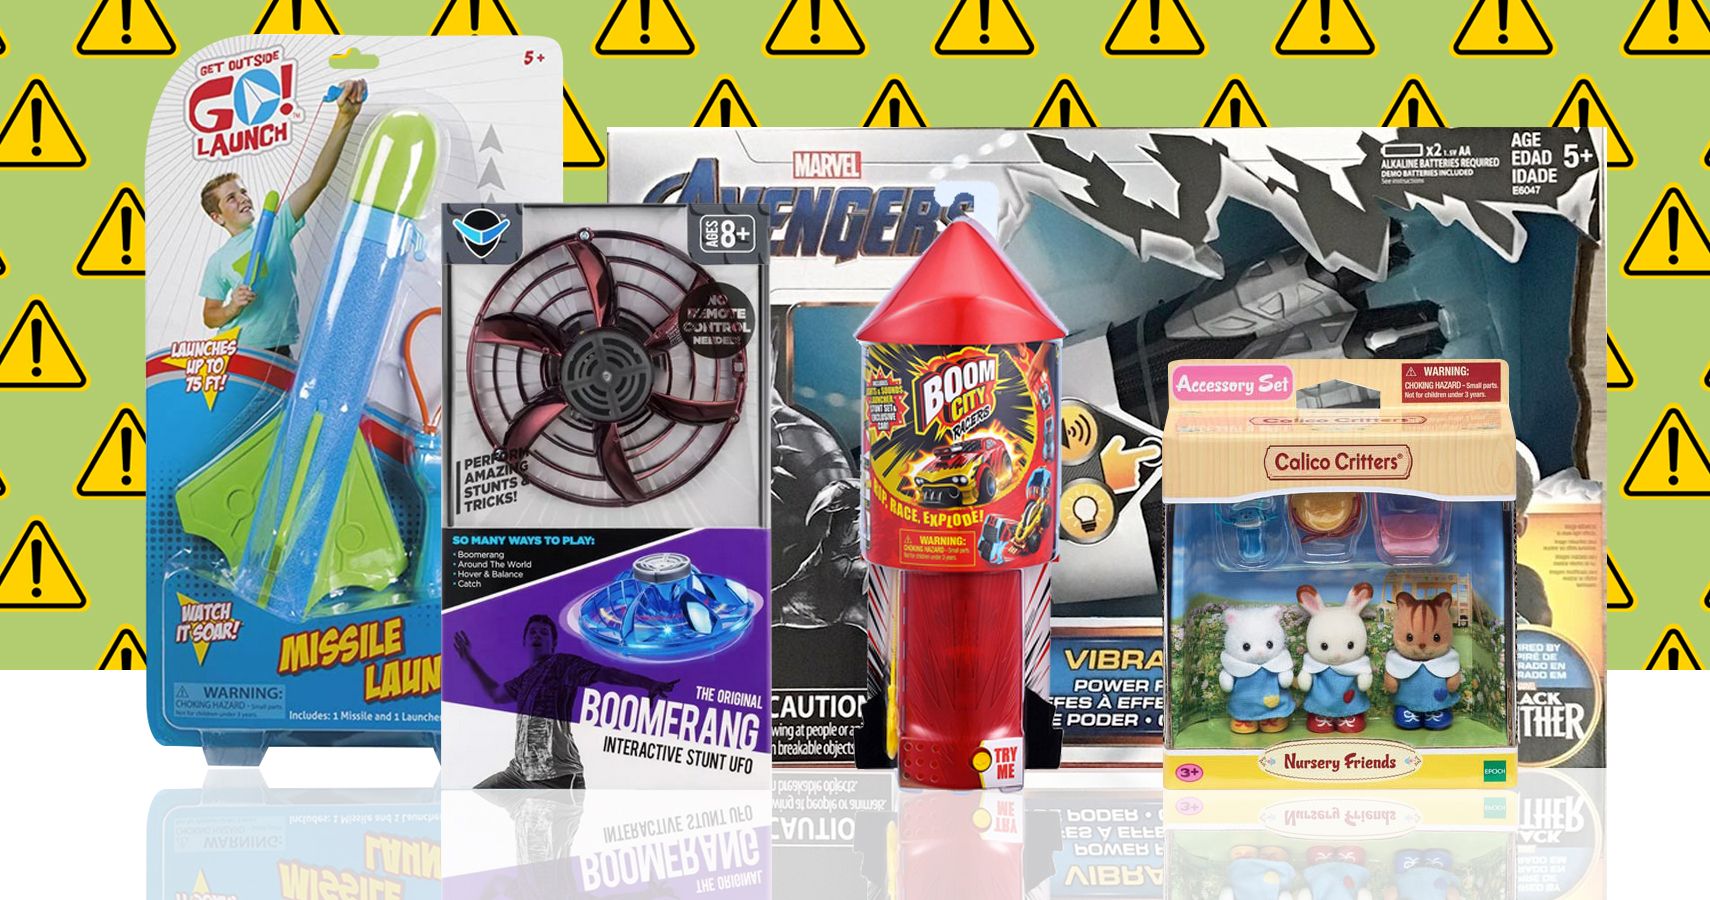 Top 10 “Worst” Toys Announced By Toy Safety Group